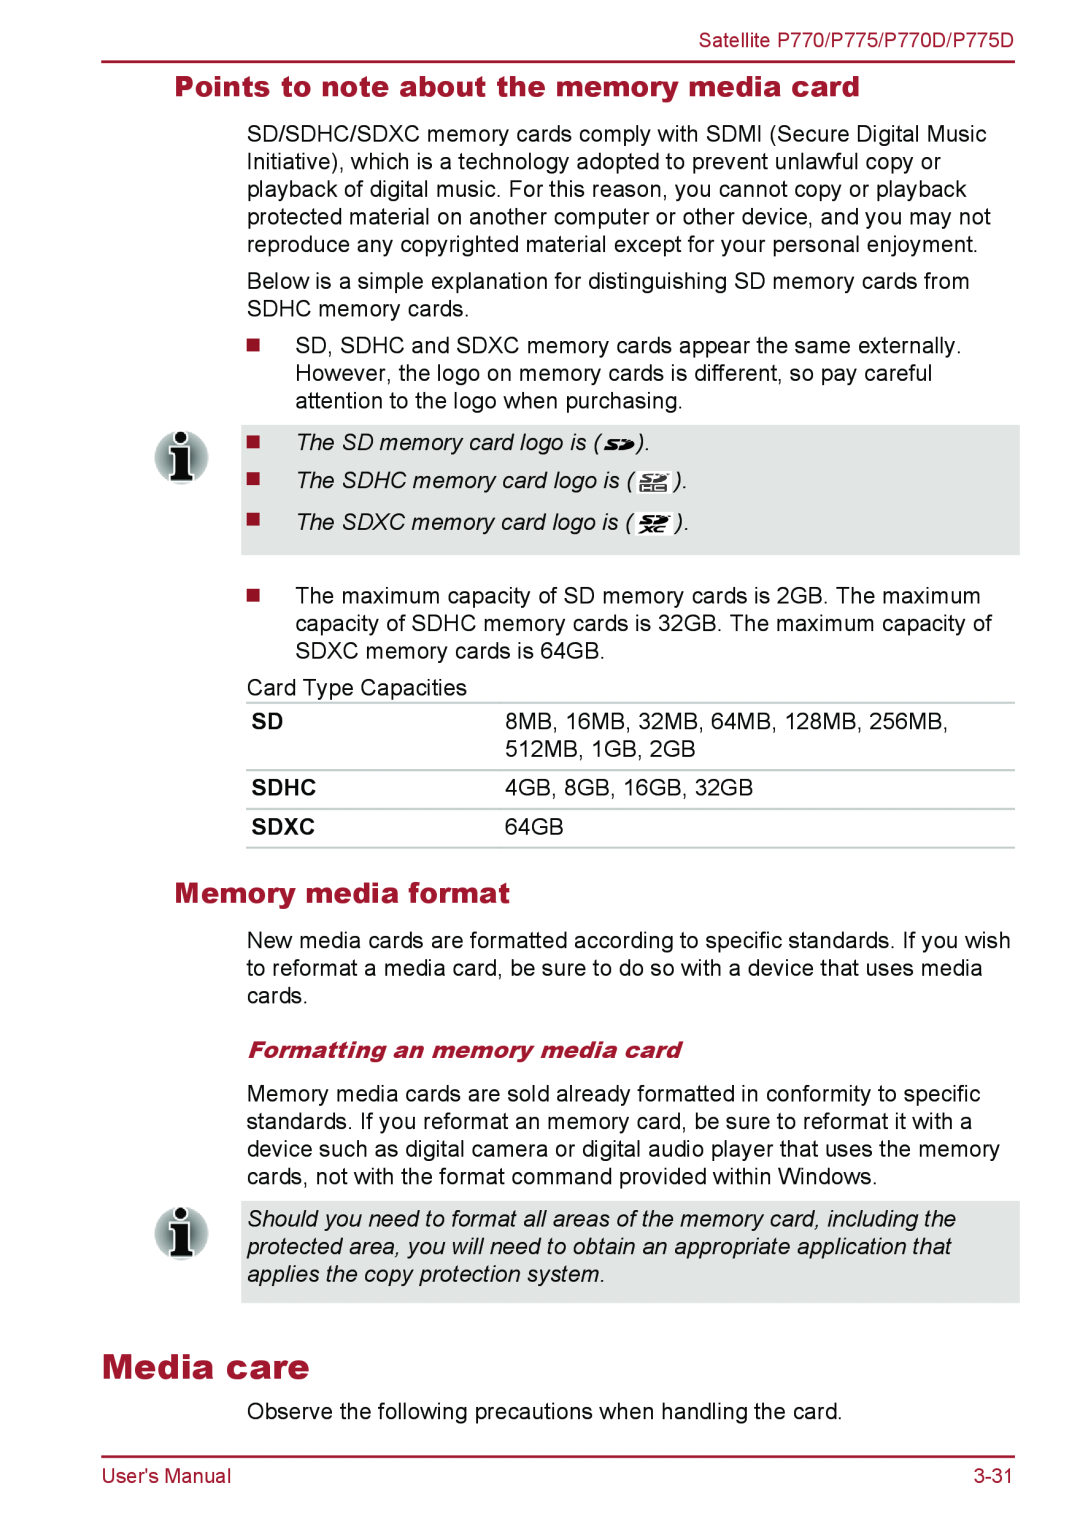 Toshiba P770 user manual Media care, Points to note about the memory media card, Memory media format, Sdhc, Sdxc 